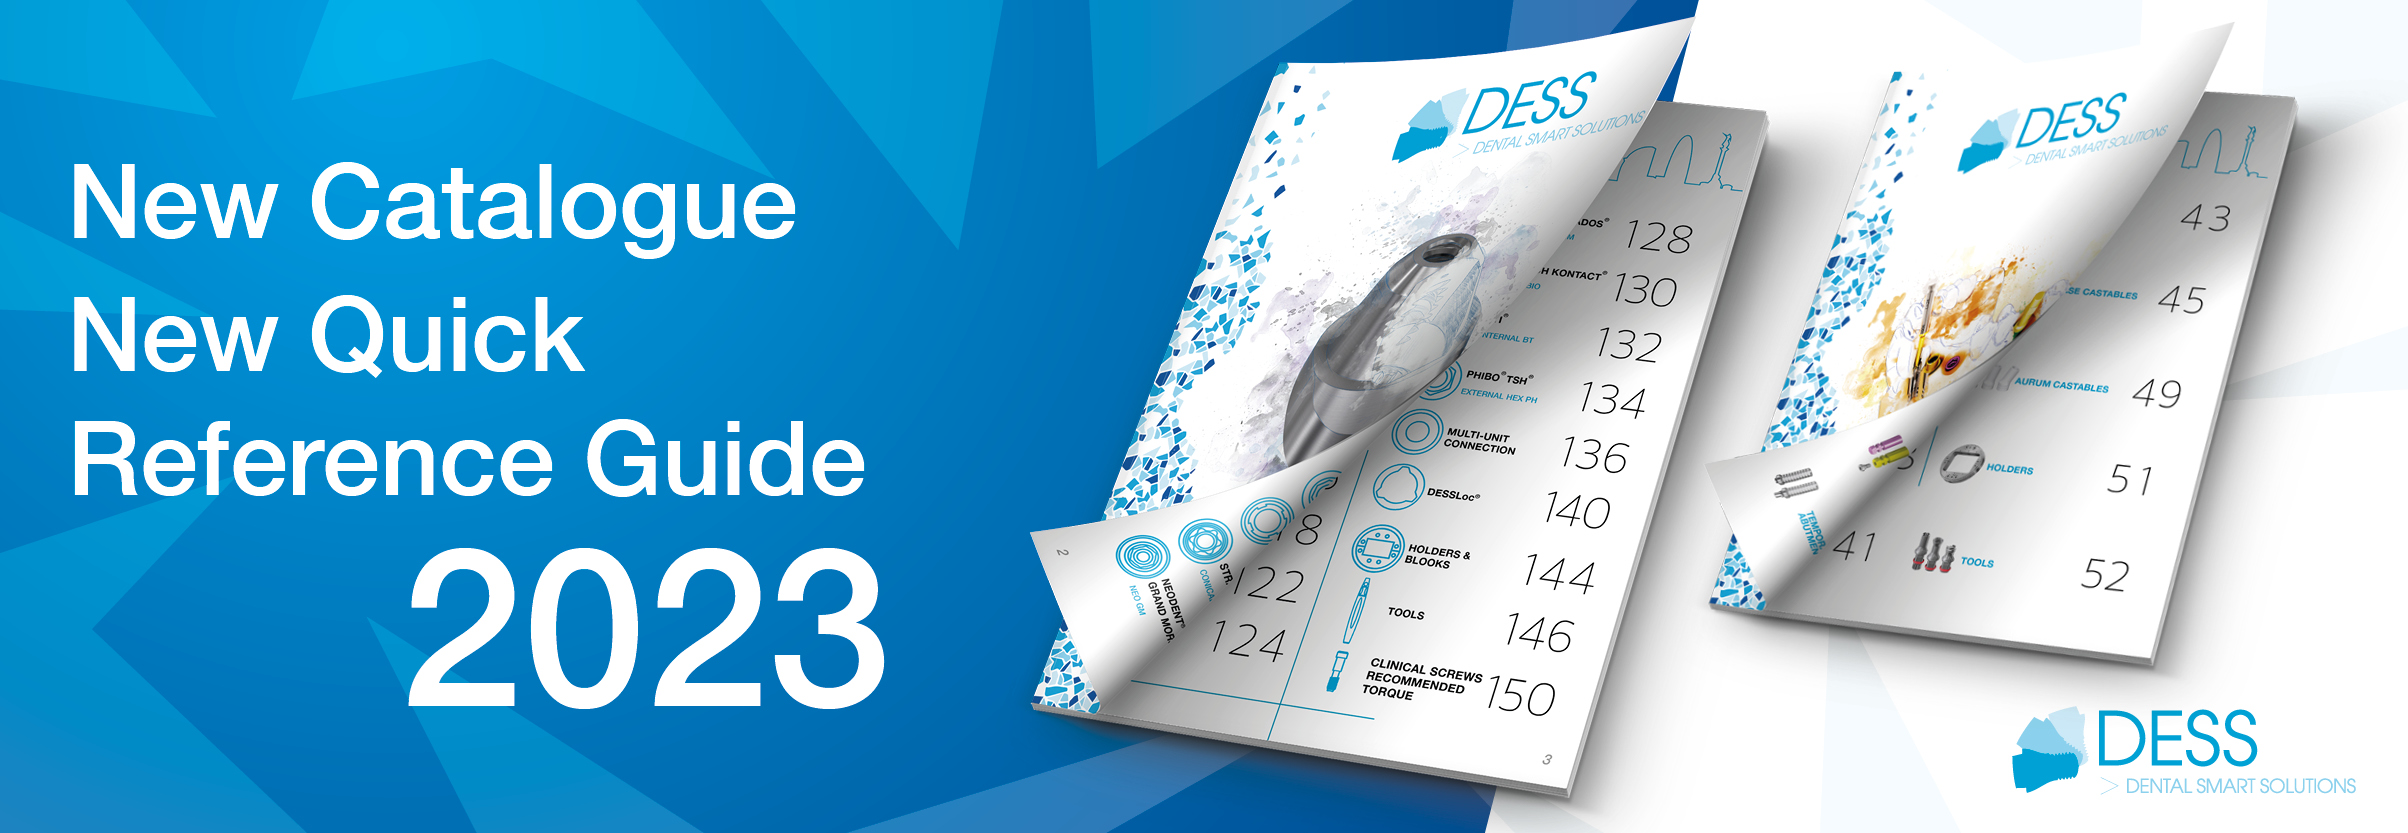 DESS Dental New 2023 Catalogues are here!